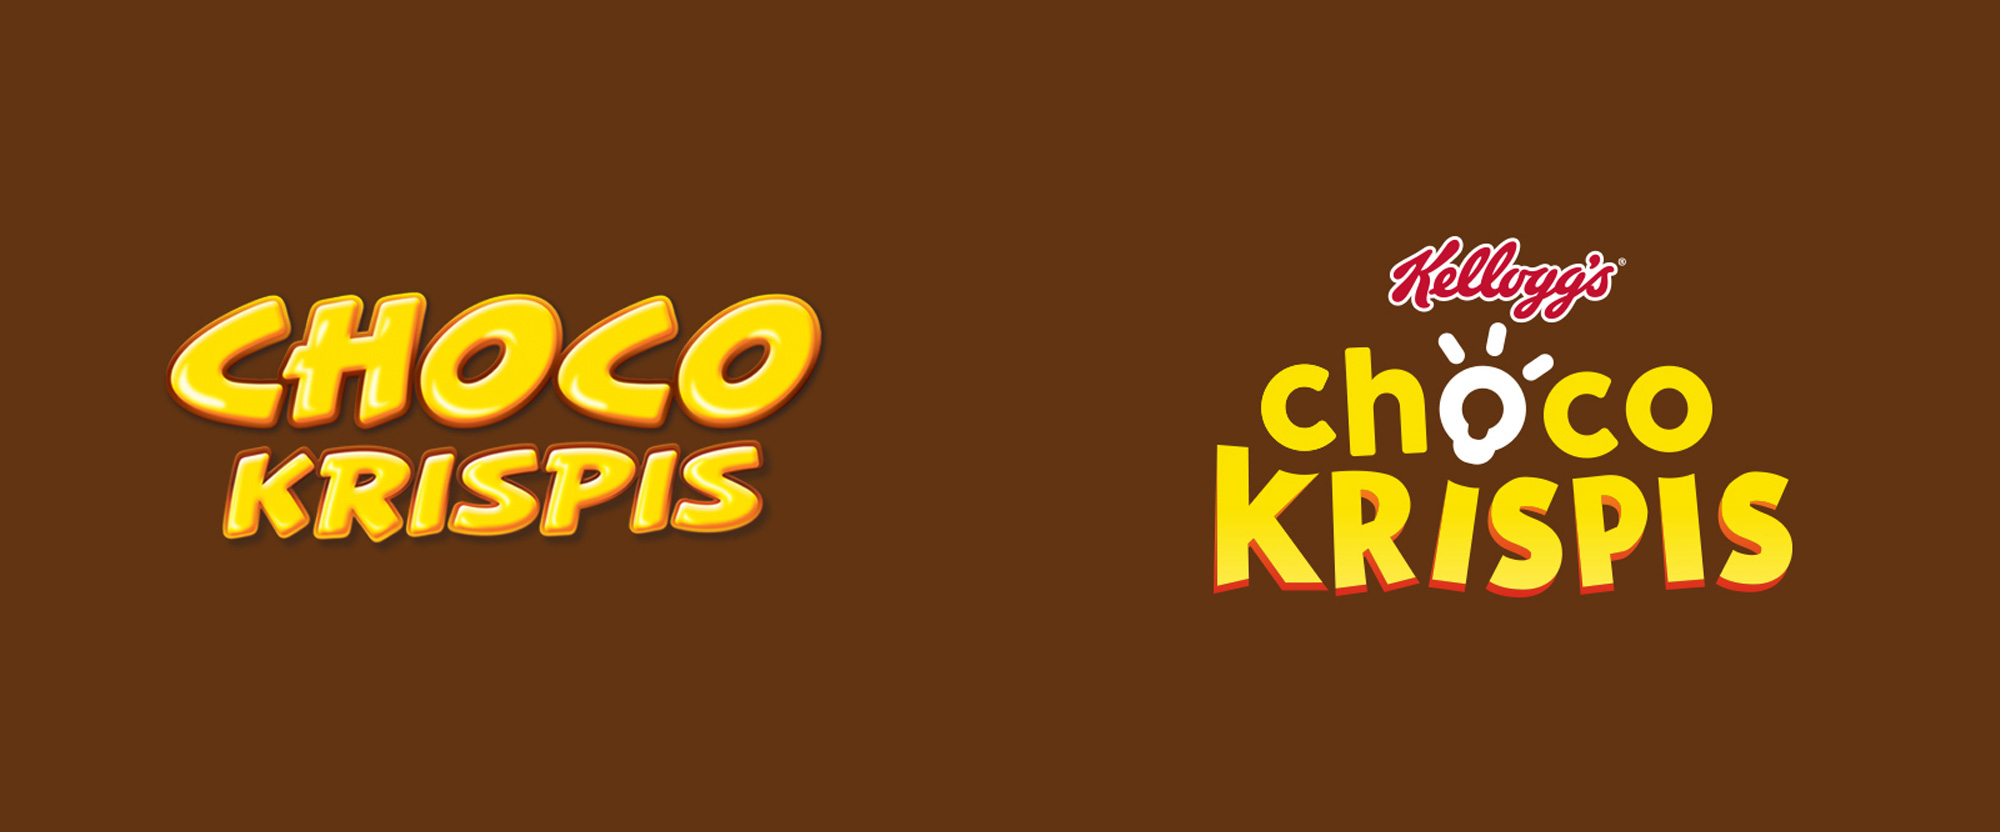 New Logo and Packaging for Choco Krispis by Interbrand